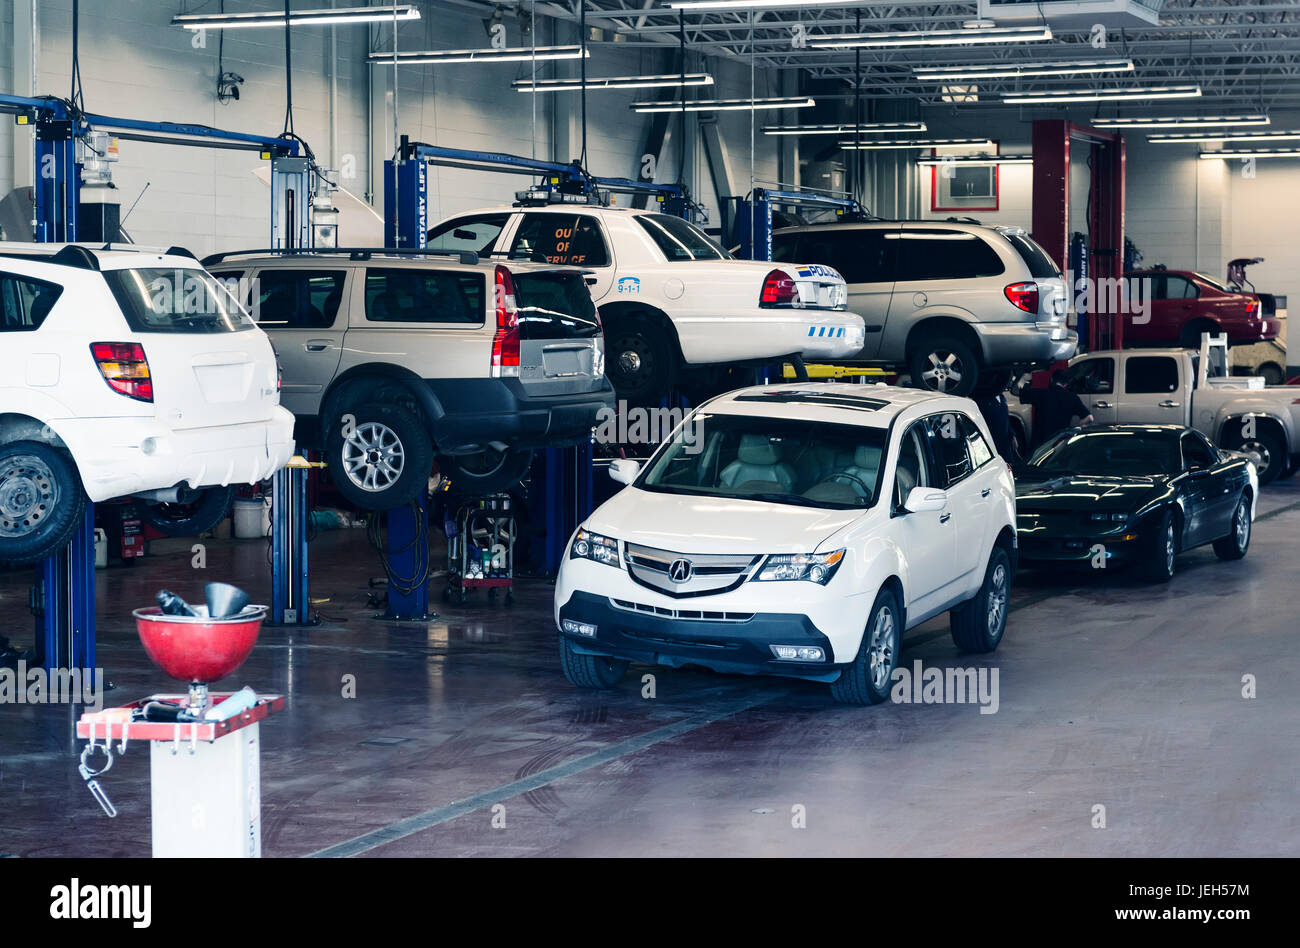 License available at MaximImages.com - Lifted up cars in a mechanic's shop being serviced and repaired. Auto service center concept. Stock Photo